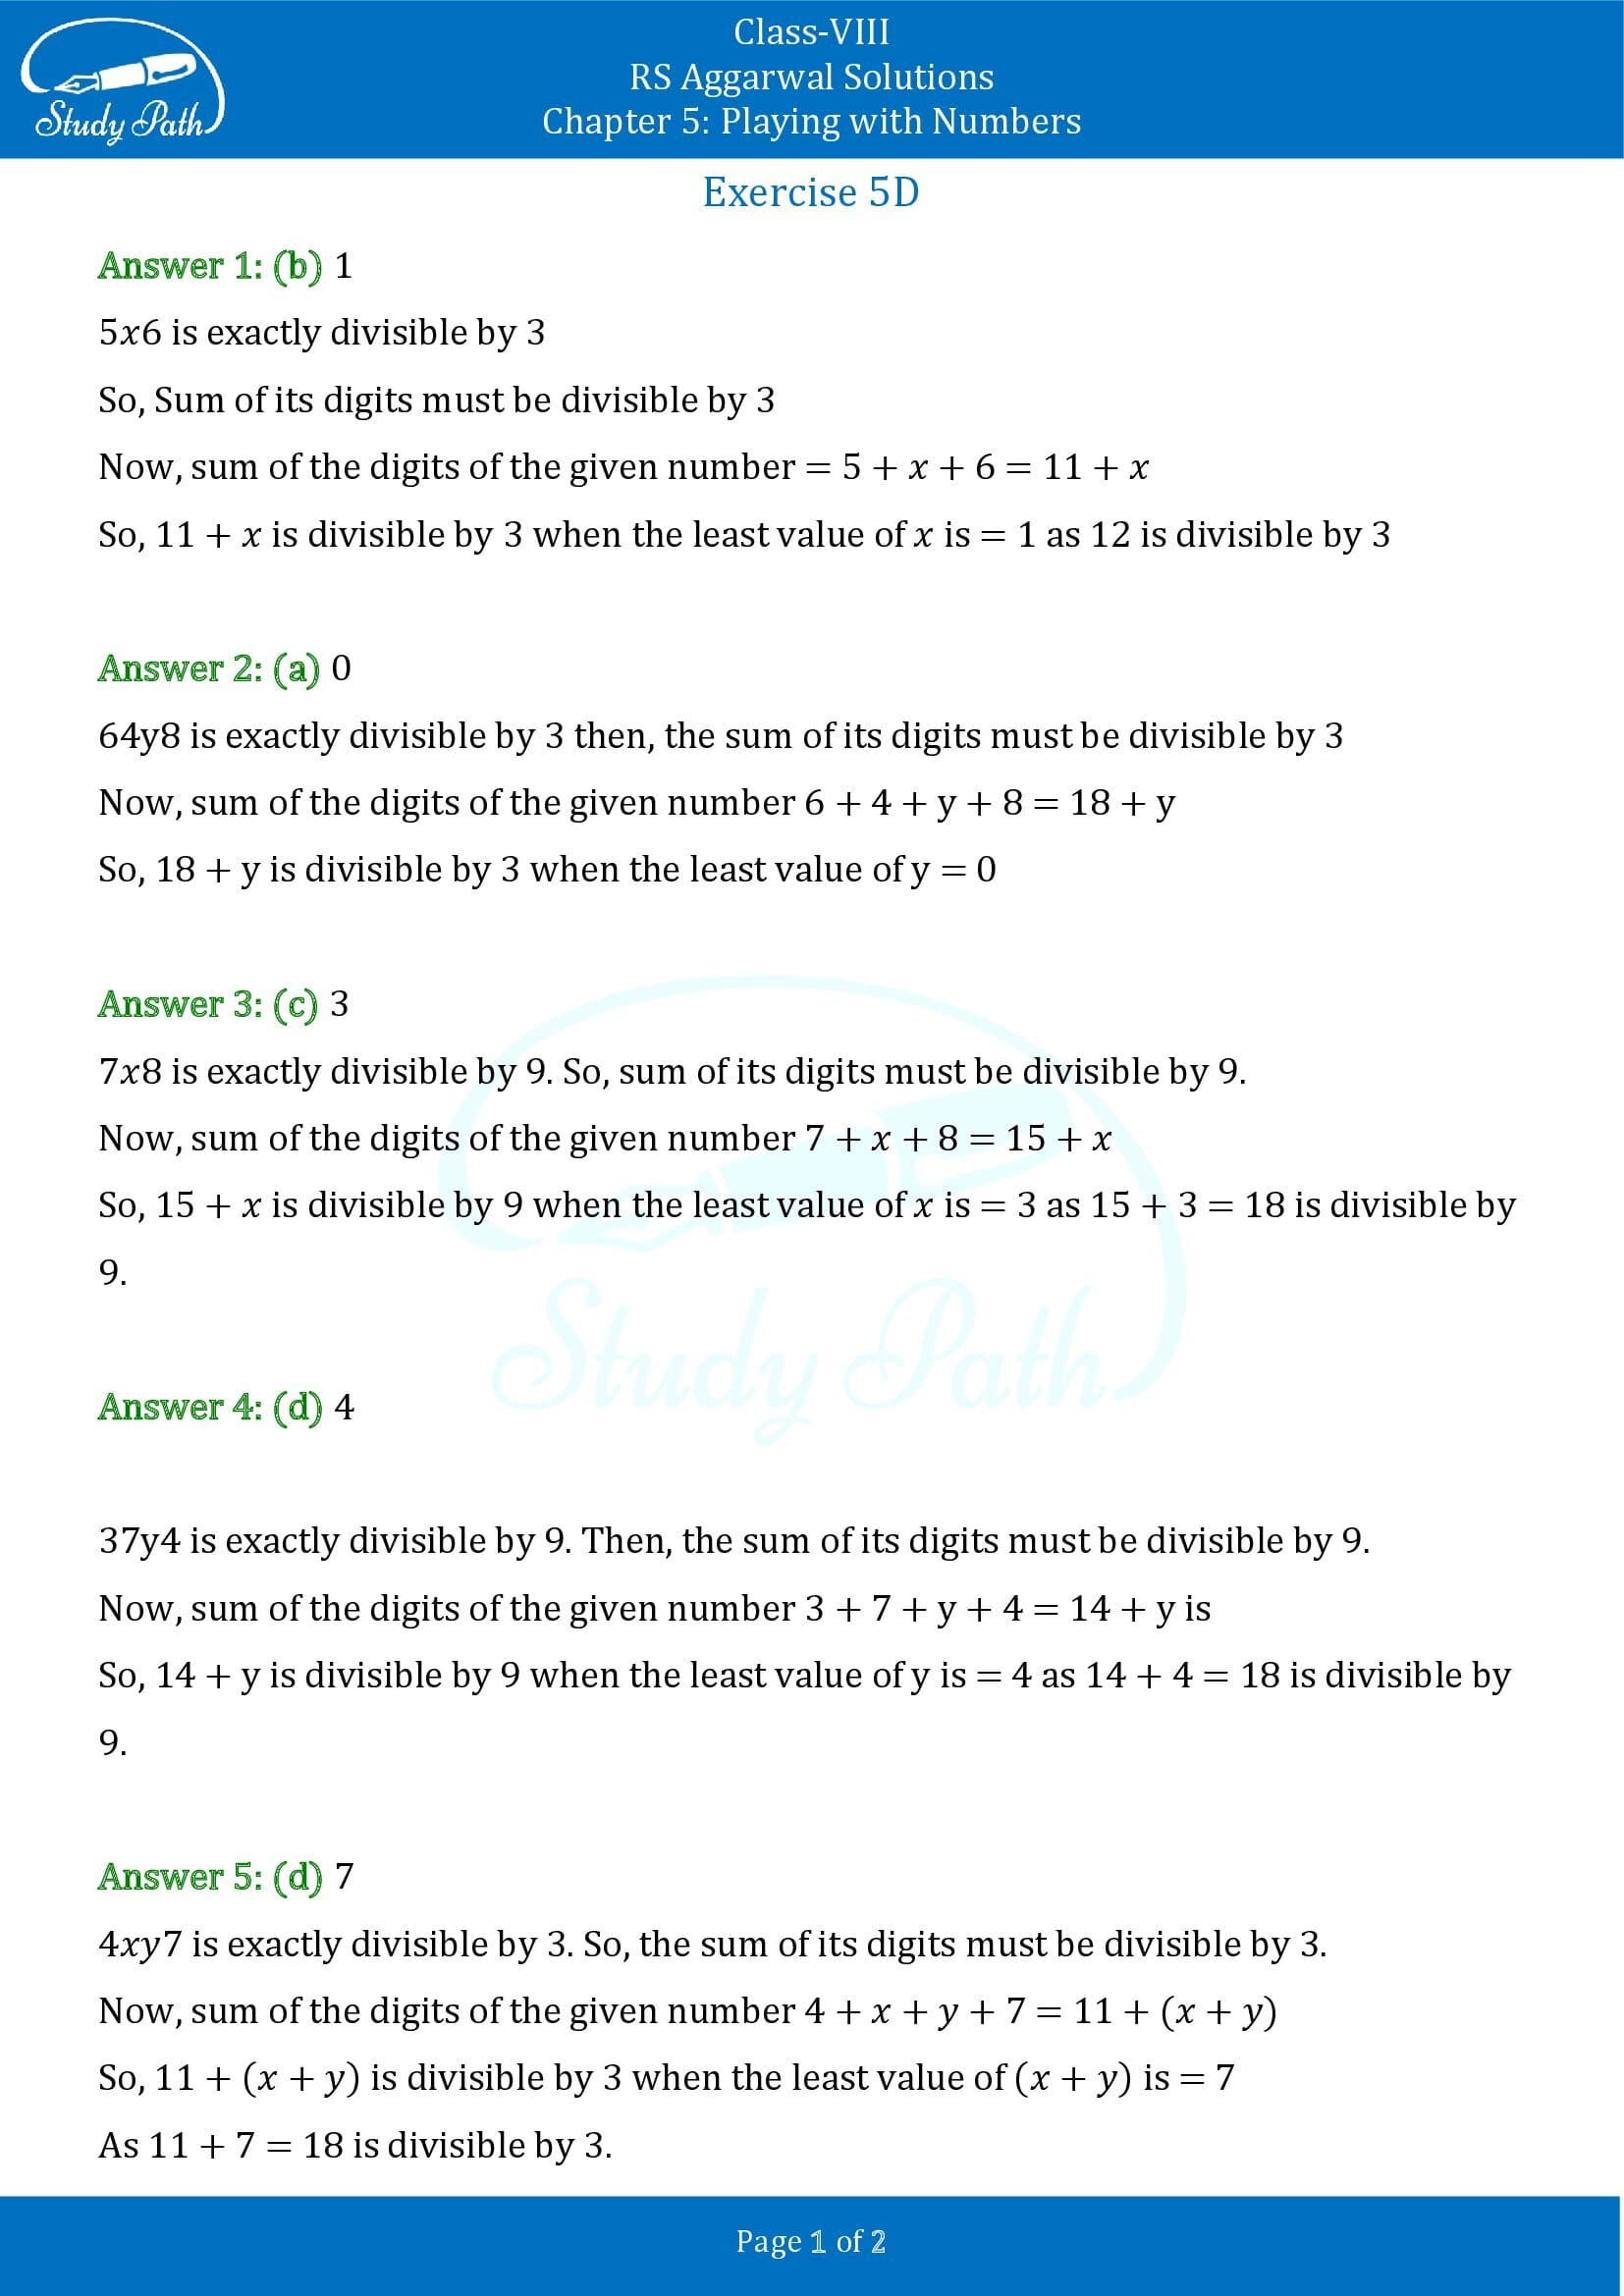 RS Aggarwal Solutions Class 8 Chapter 5 Playing with Numbers Exercise 5D MCQs 0001